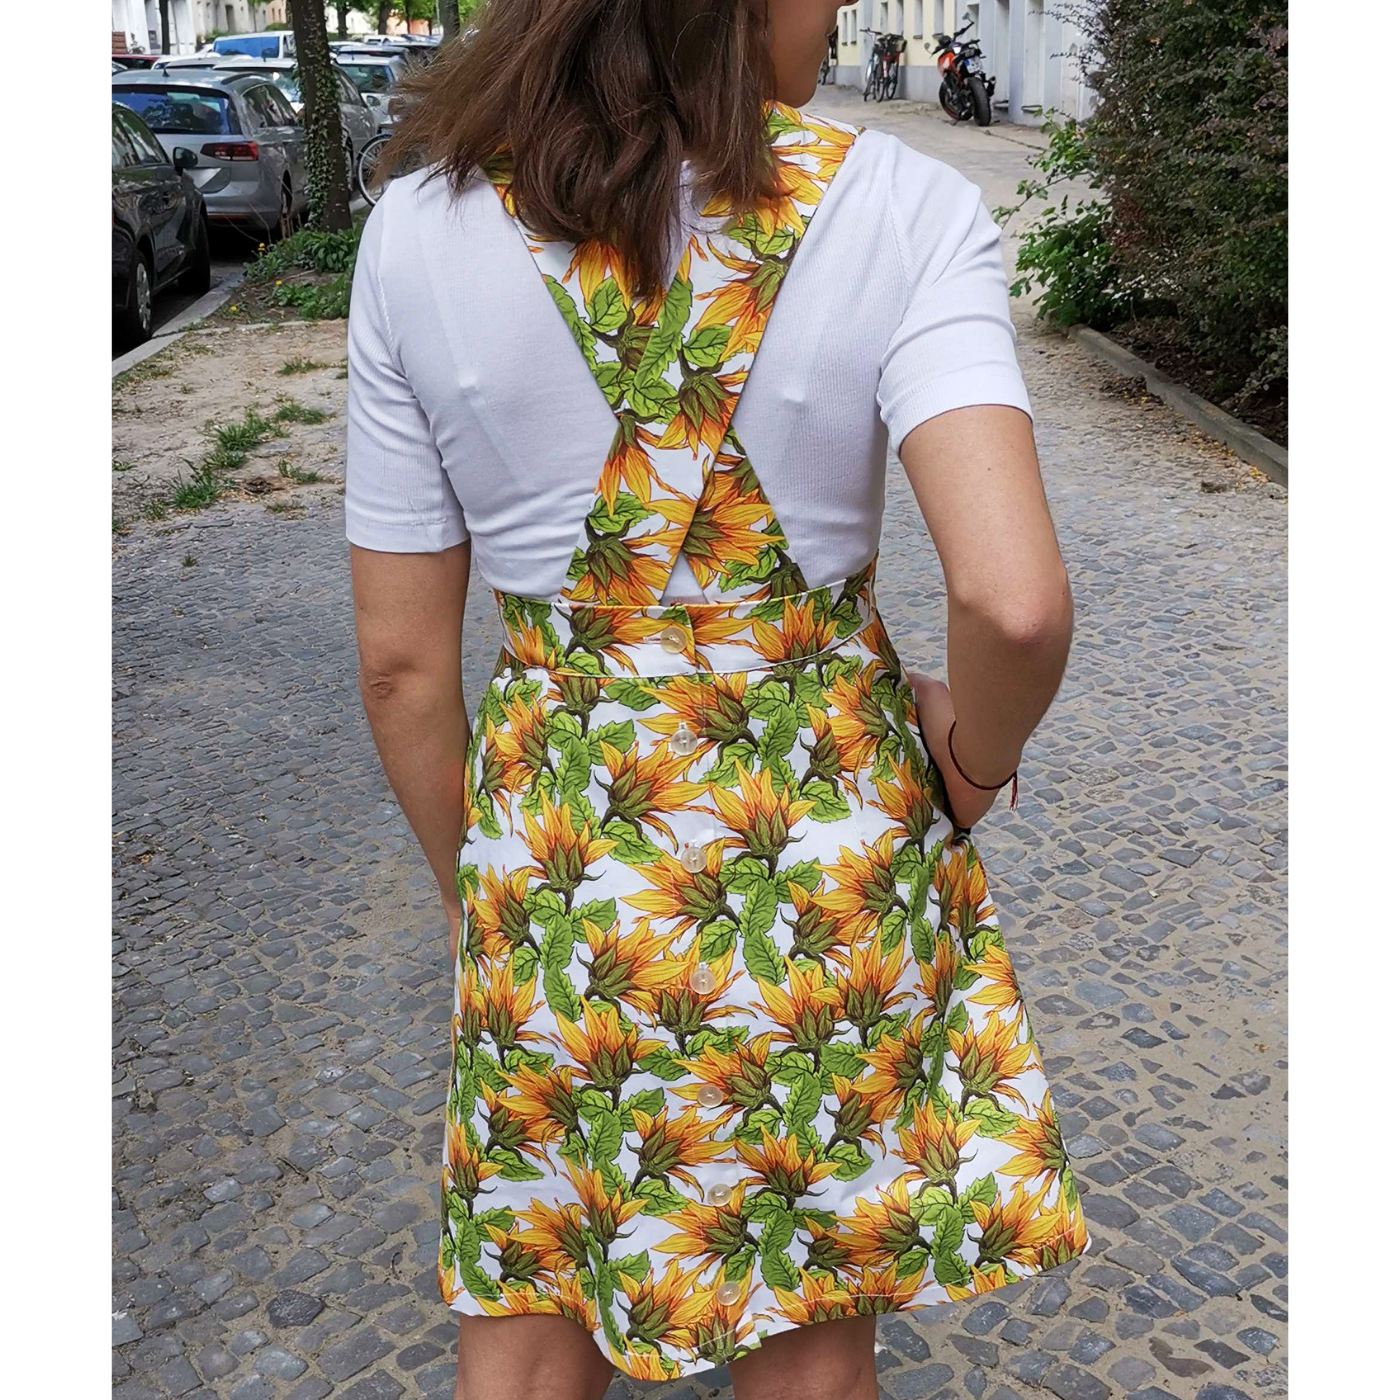 Maike stands with her back to the camera with her left hand in her pocket. She is wearing a pinafore with a white background and sunflower design and a short-sleeve white shirt underneath.